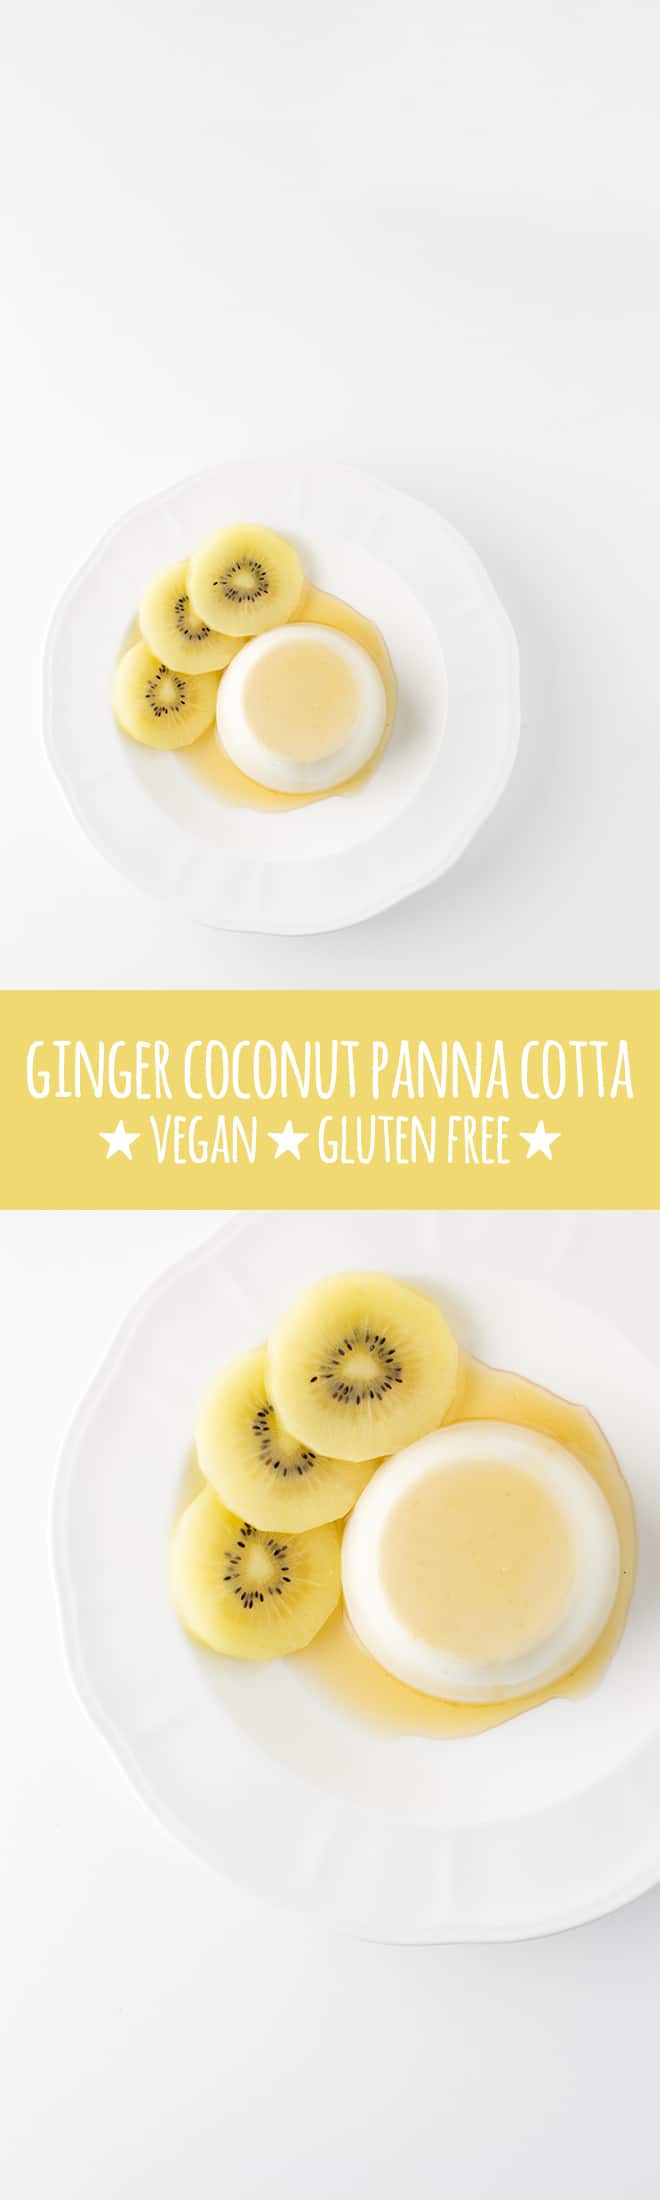 Perfectly wobbly vegan panna cotta with a warm hum of ginger is gorgeous served with golden kiwifruit.